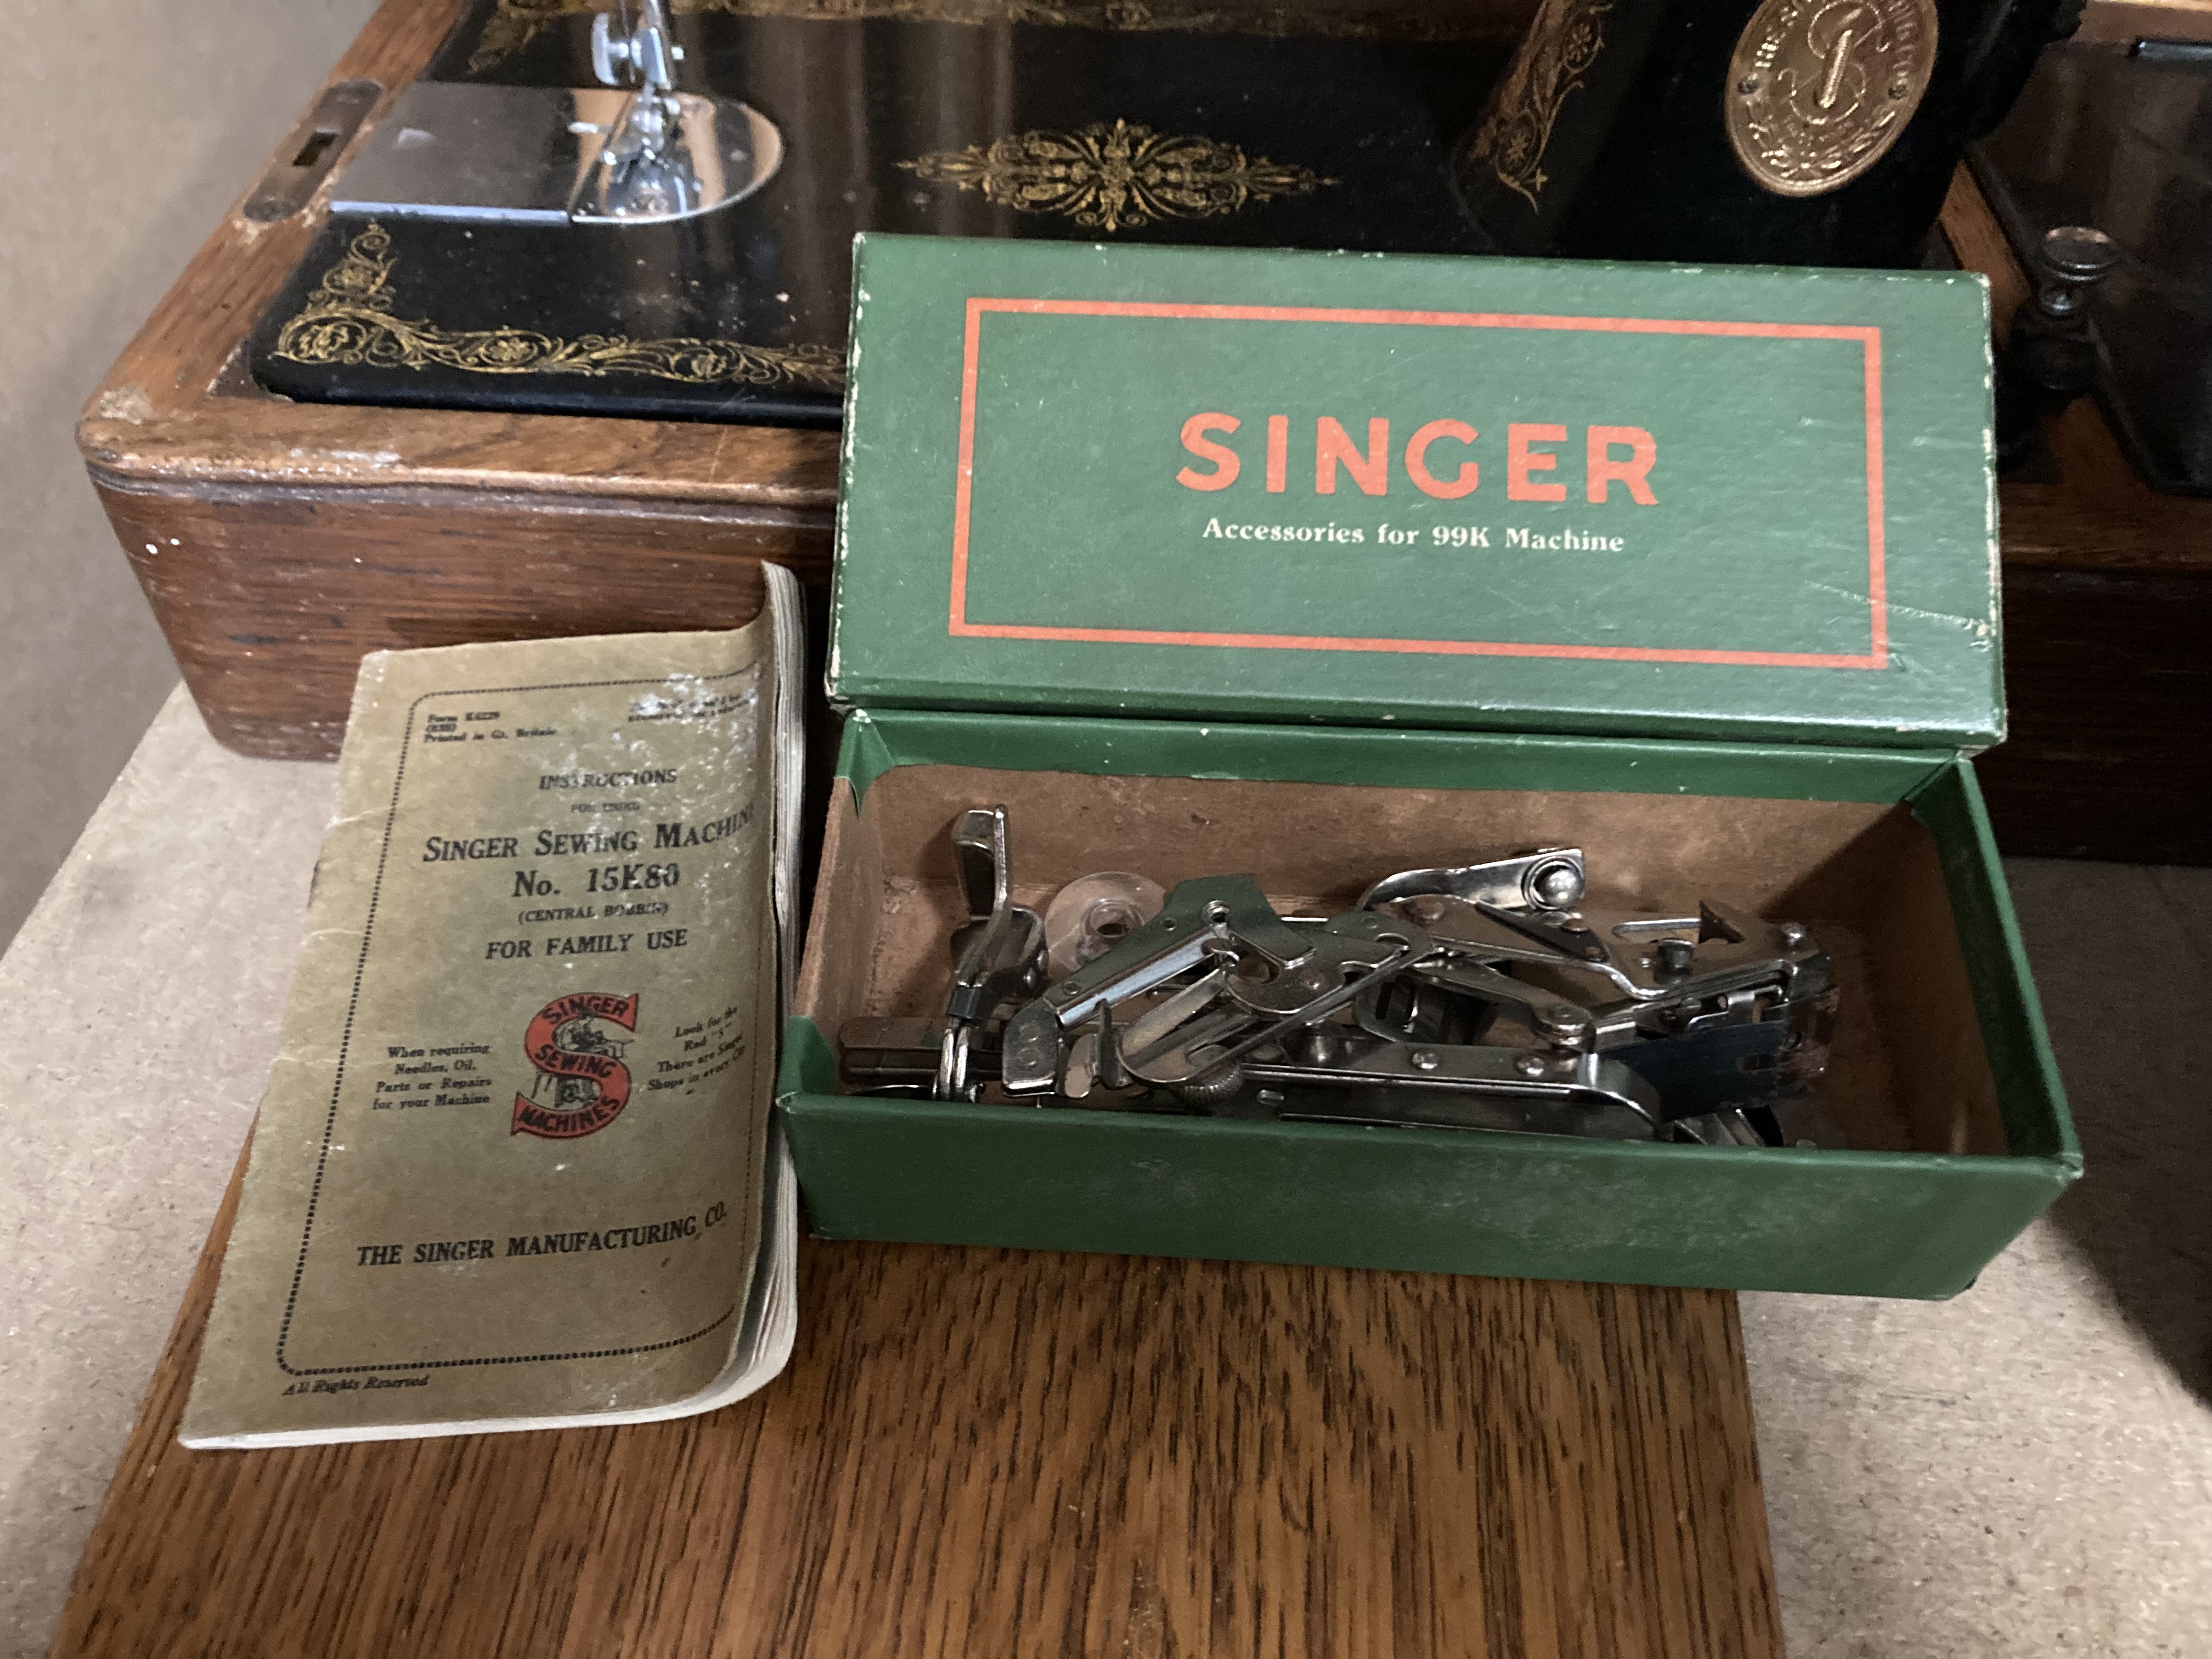 A Singer sewing machine in oak finish portable case complete with accessory pack for a Singer 99K - Image 2 of 2